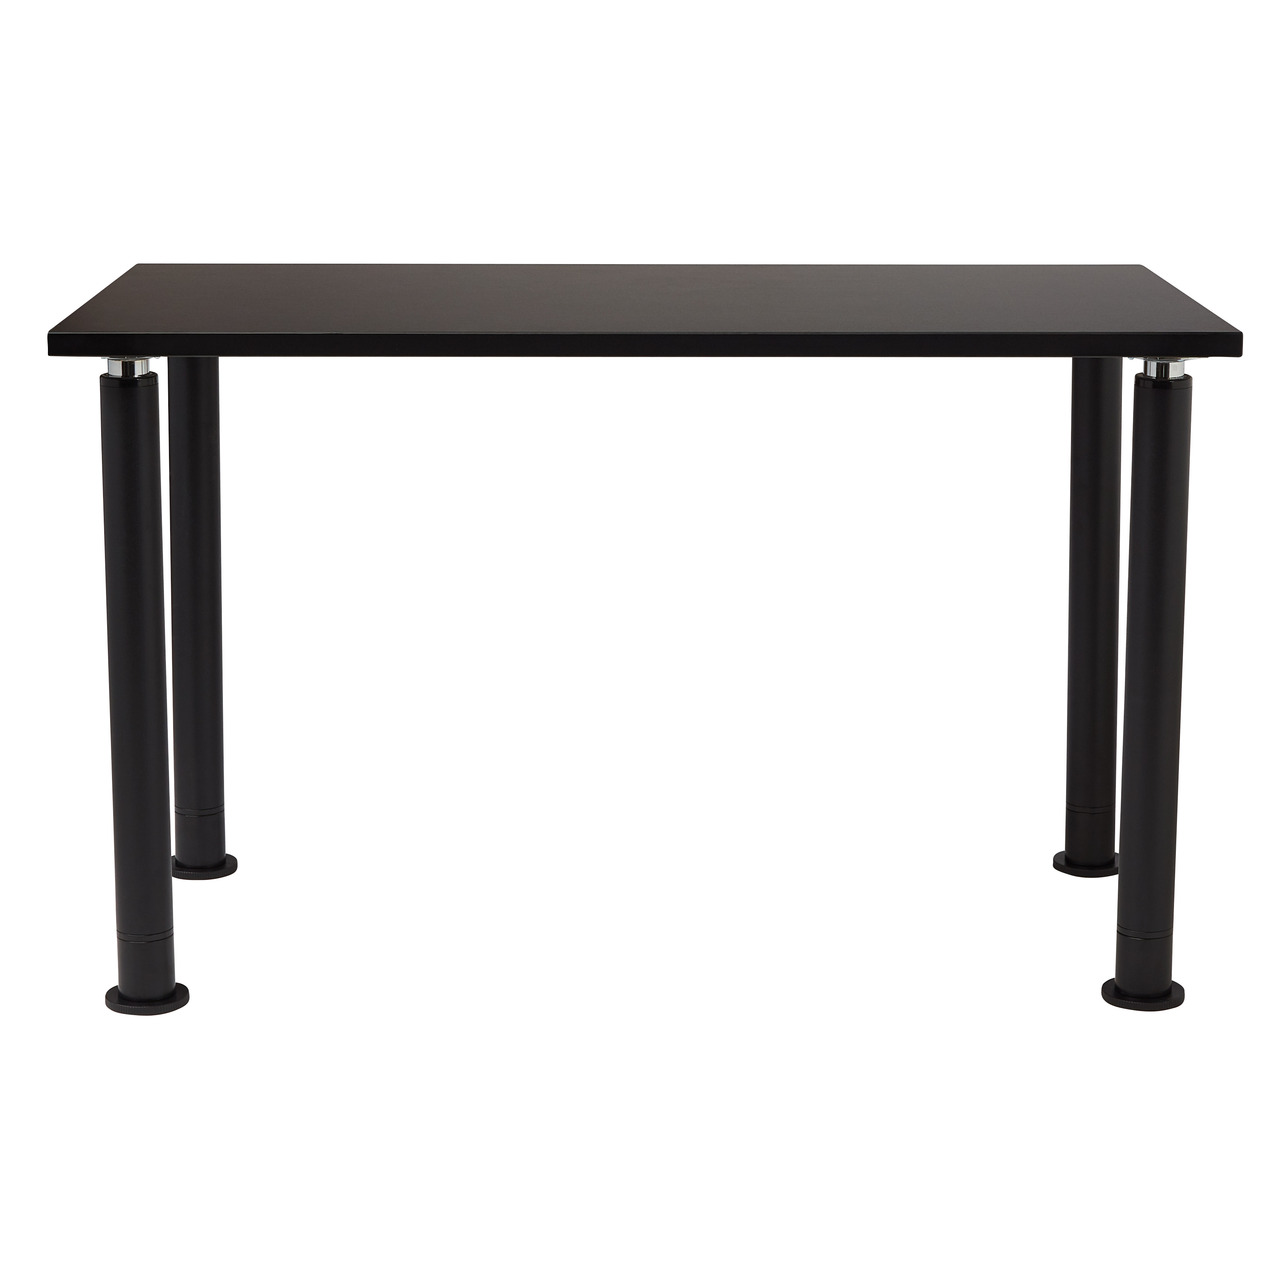 NPS Designer Science Table, 24"x72", Chemical Resistant Top - Black Top and Black Leg